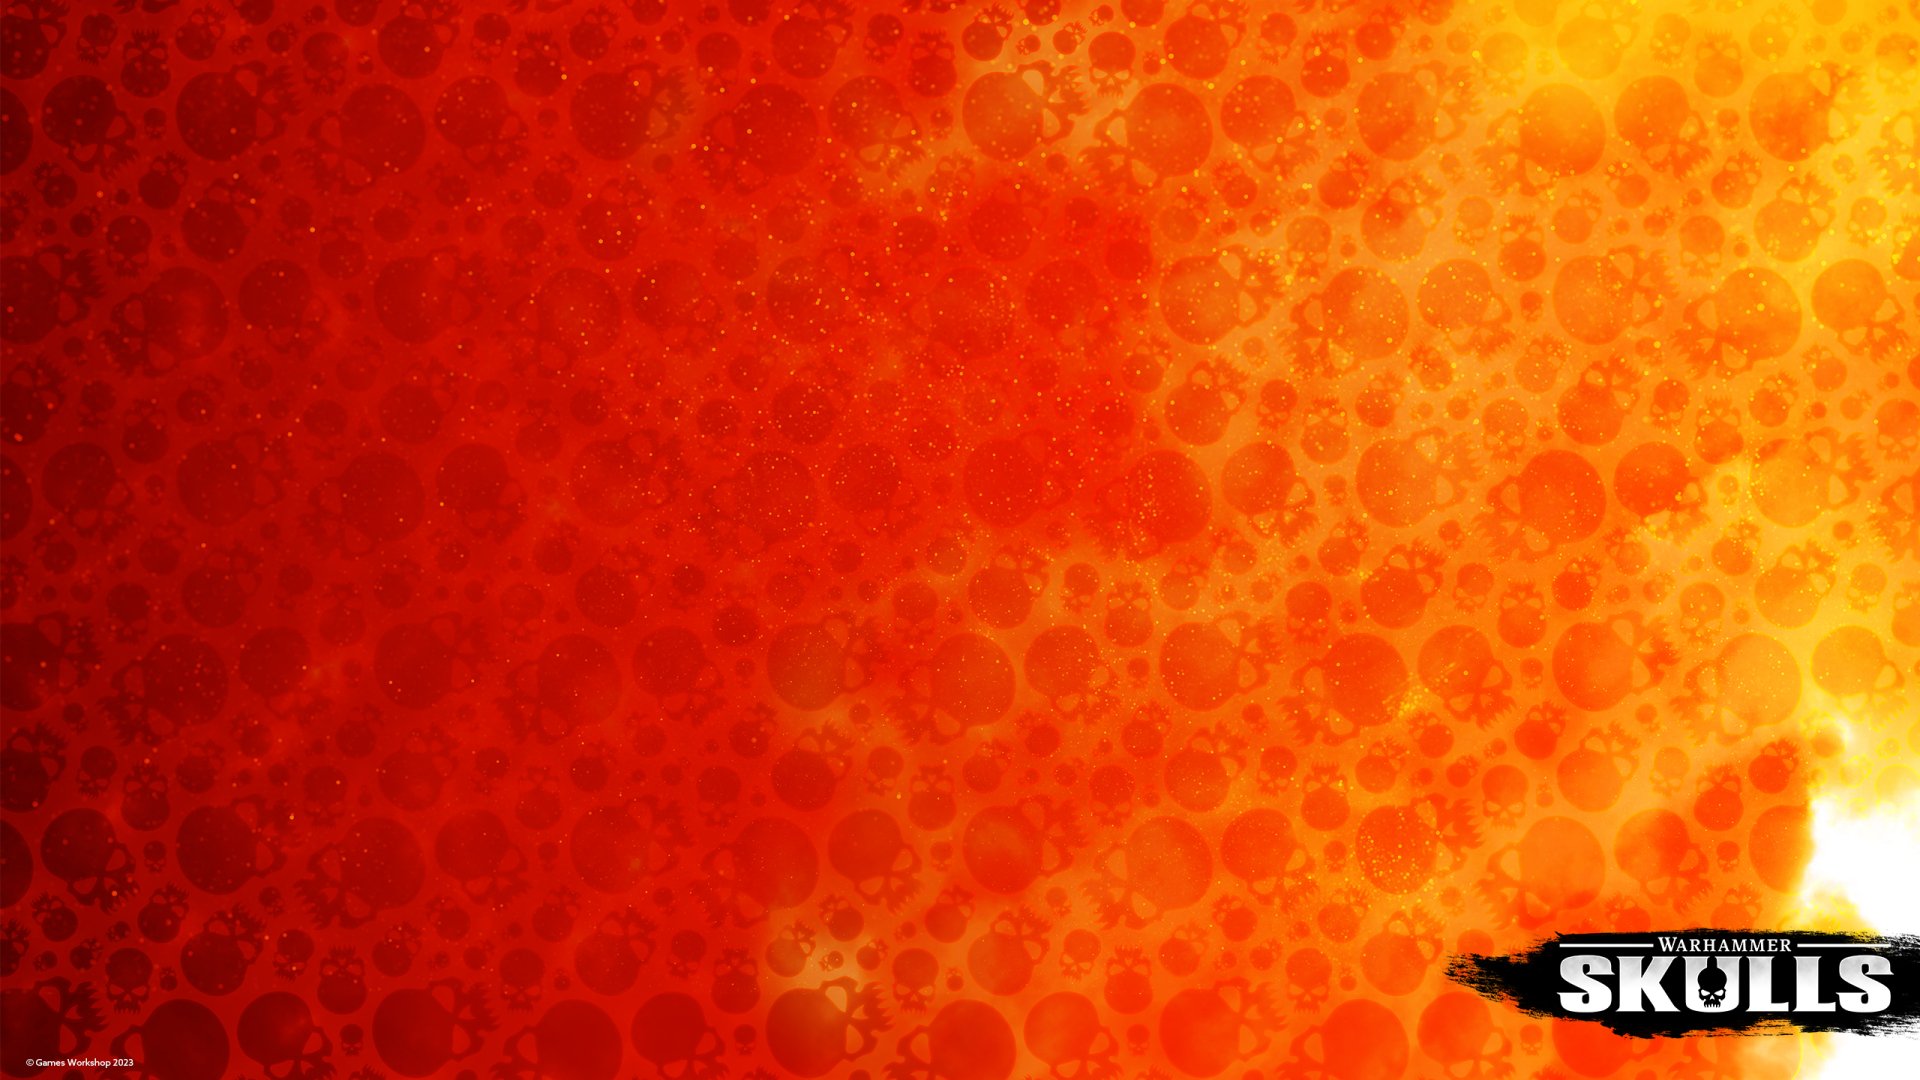 HD desktop wallpaper featuring a vibrant orange Warhammer-themed background with a pattern of bubbles and a skull logo.